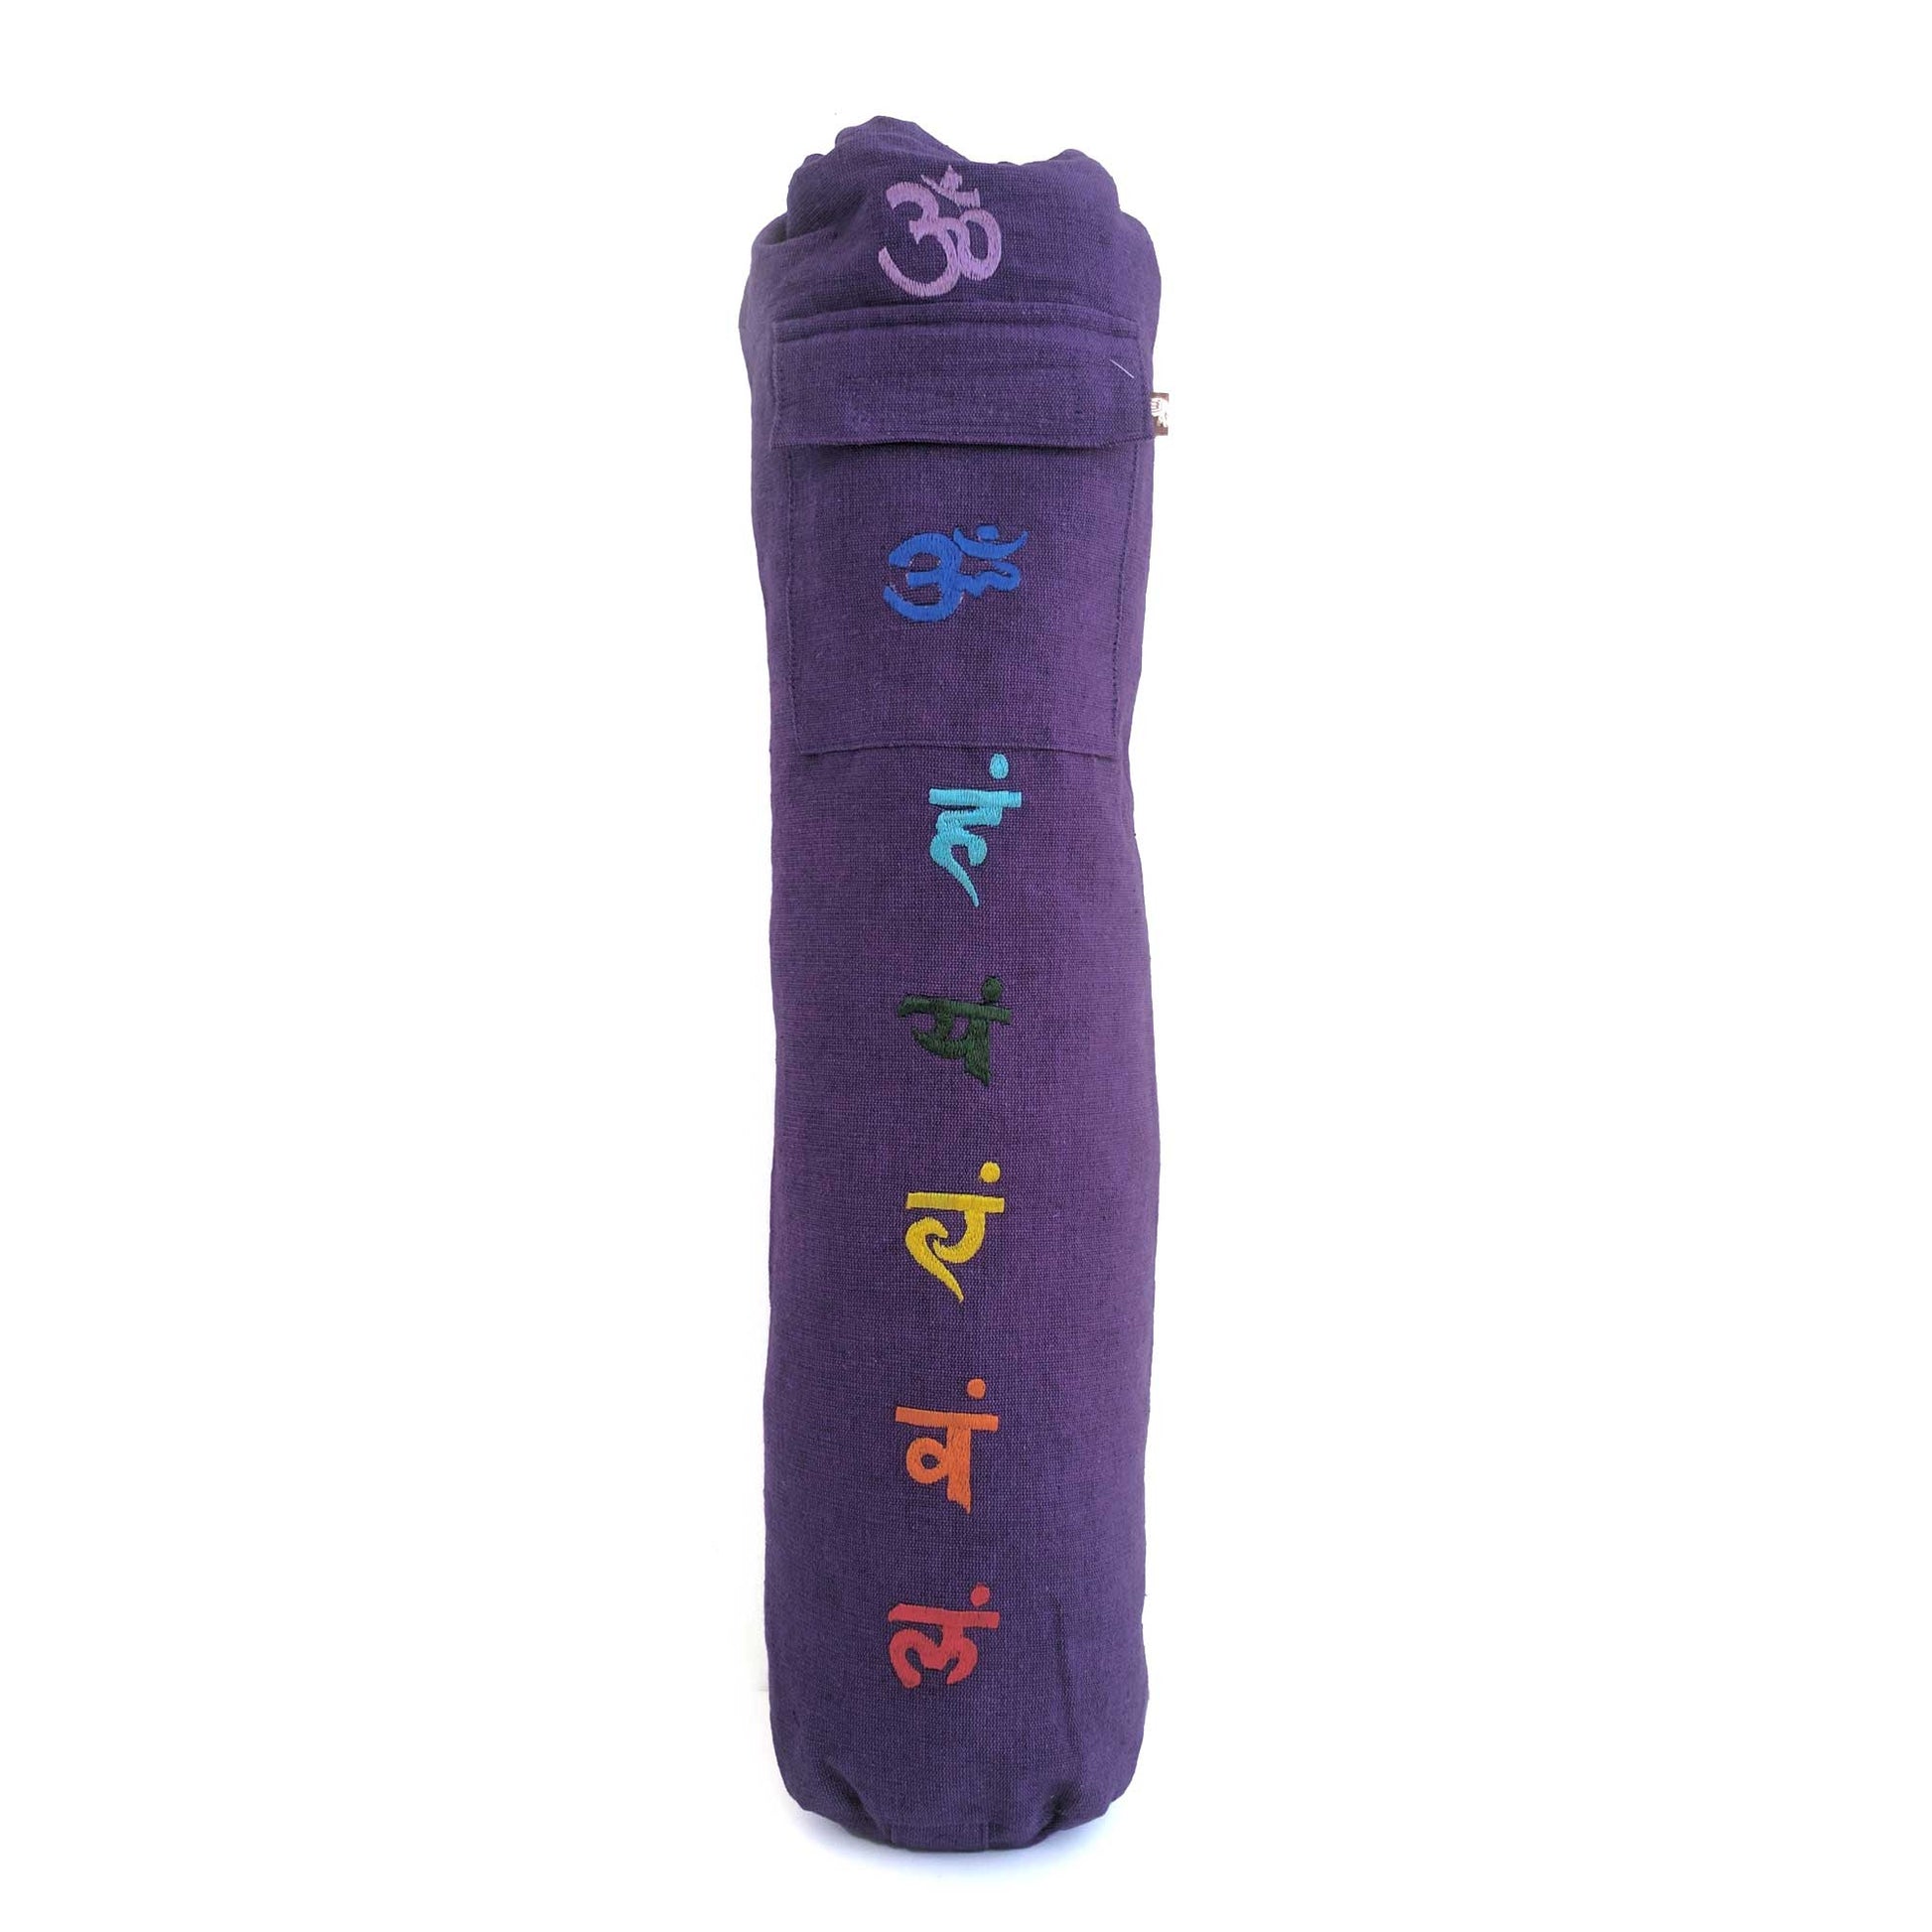 Yoga Mat Bag Om Symbols with hand-embroidery